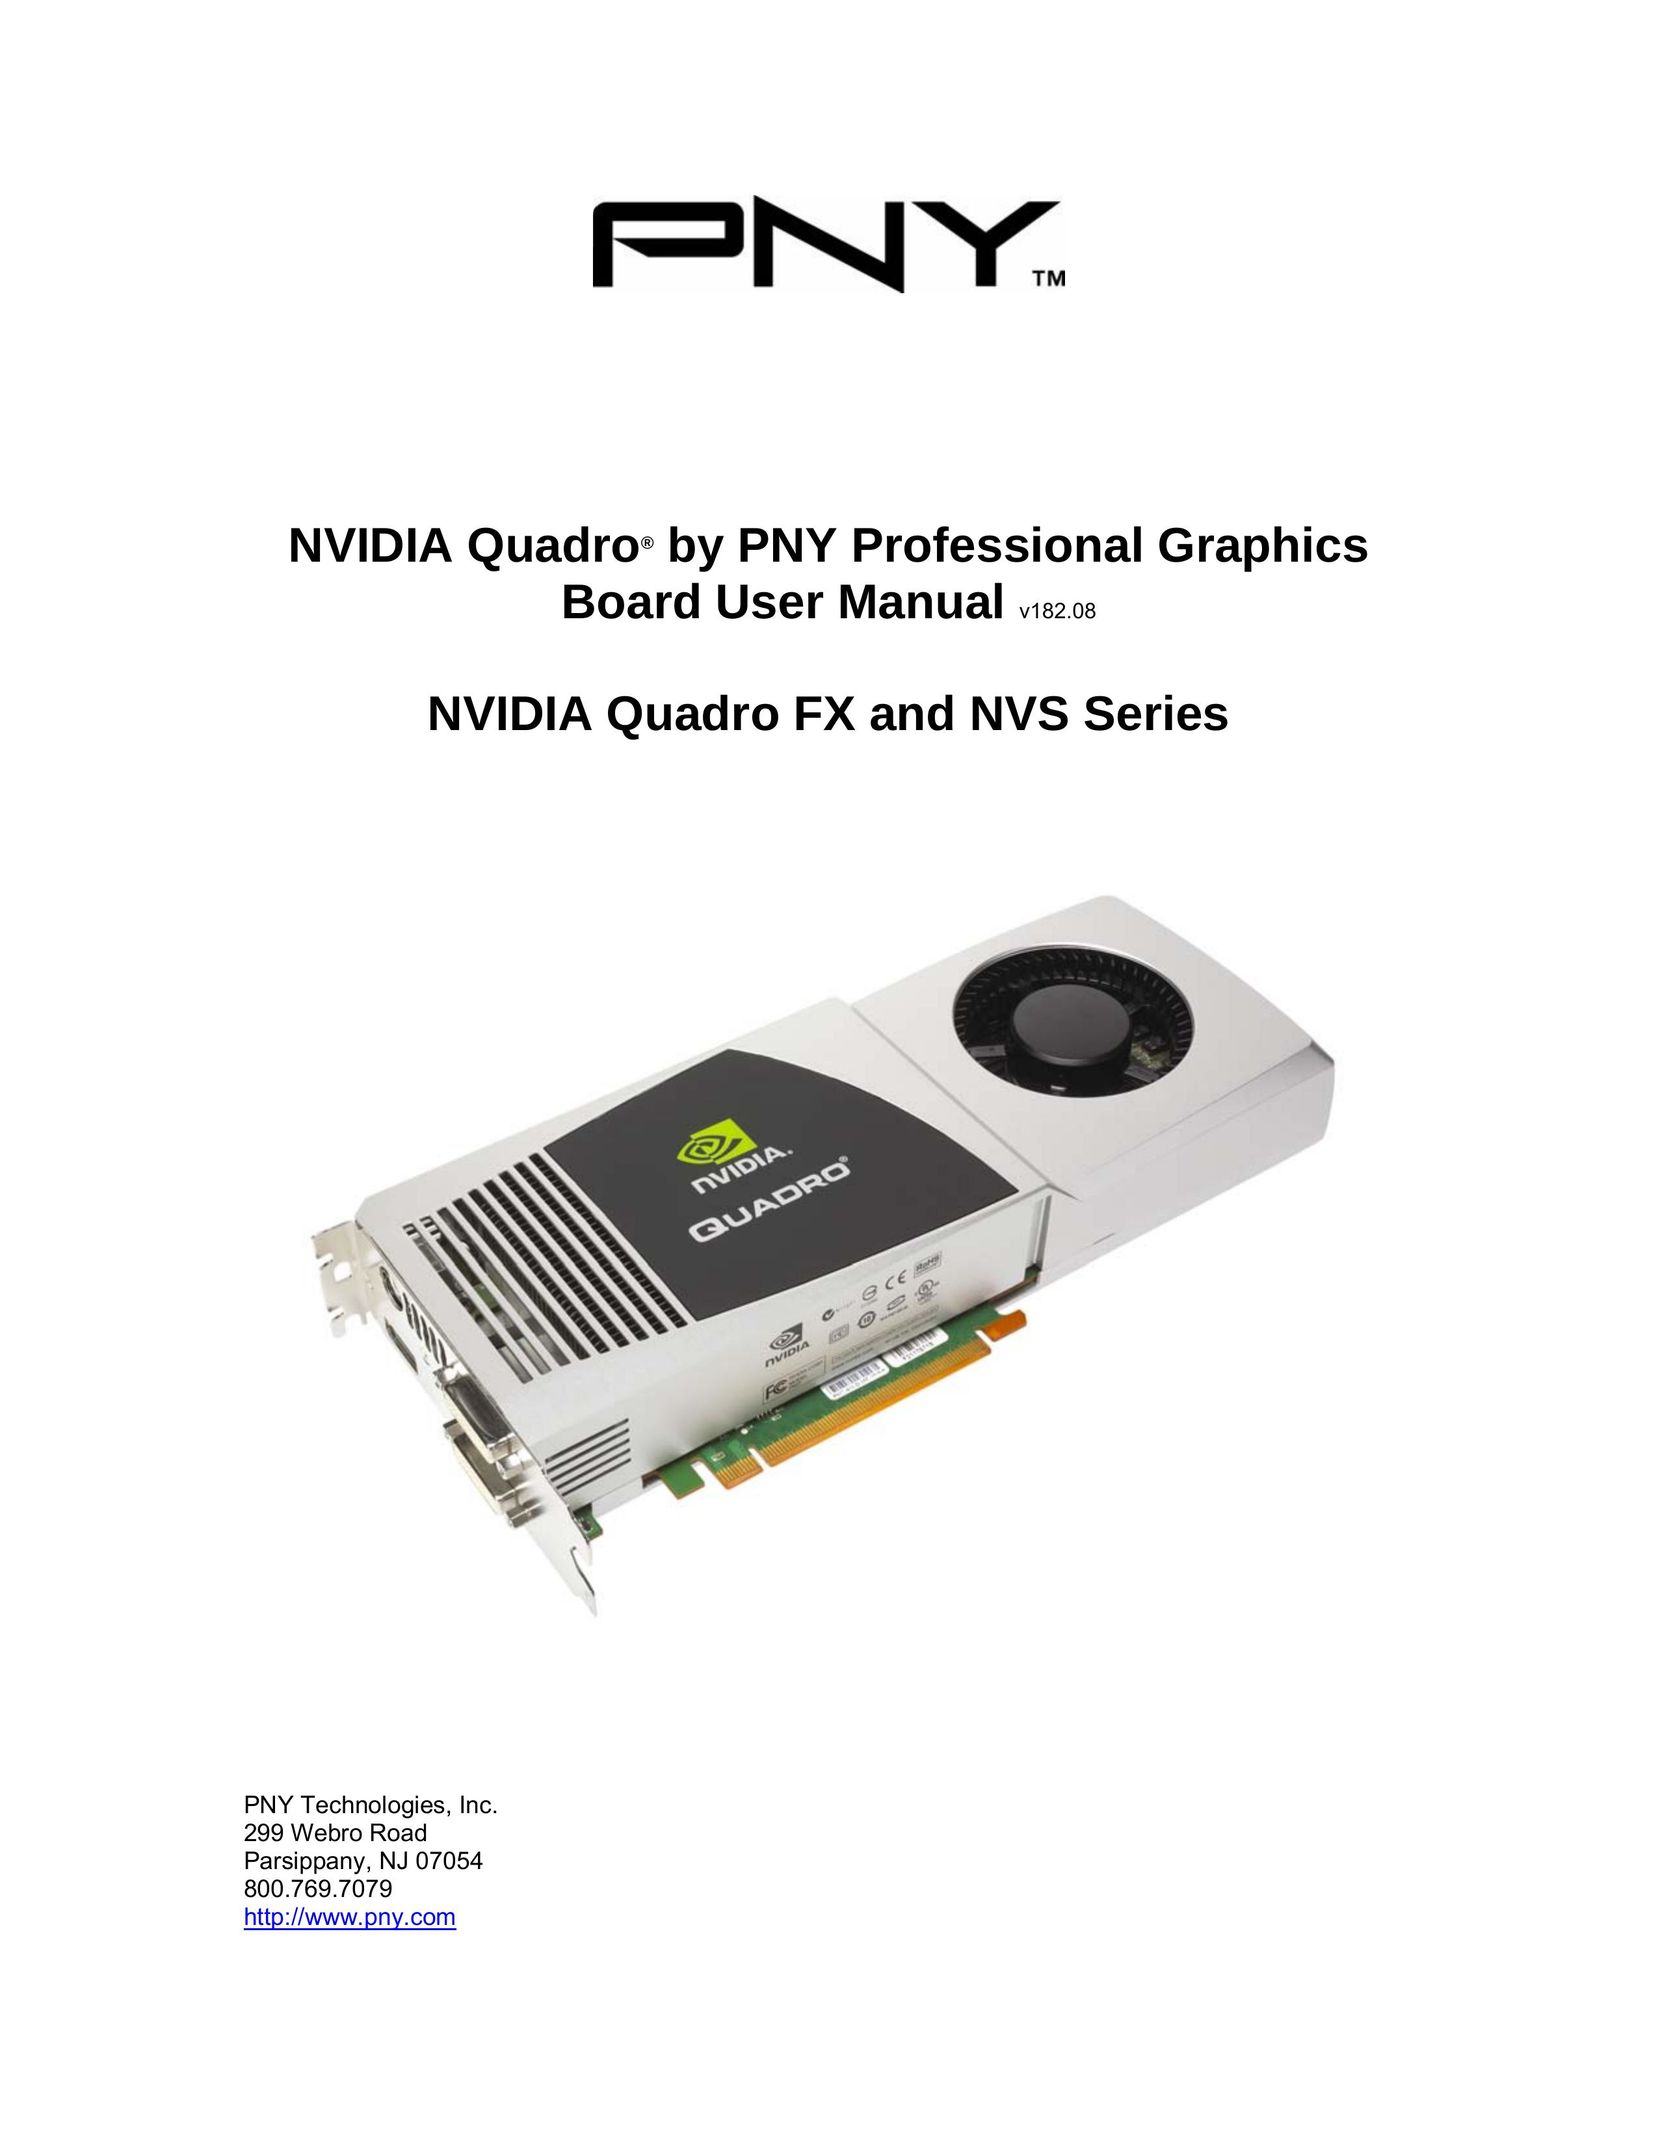 PNY FX 5600 Computer Hardware User Manual